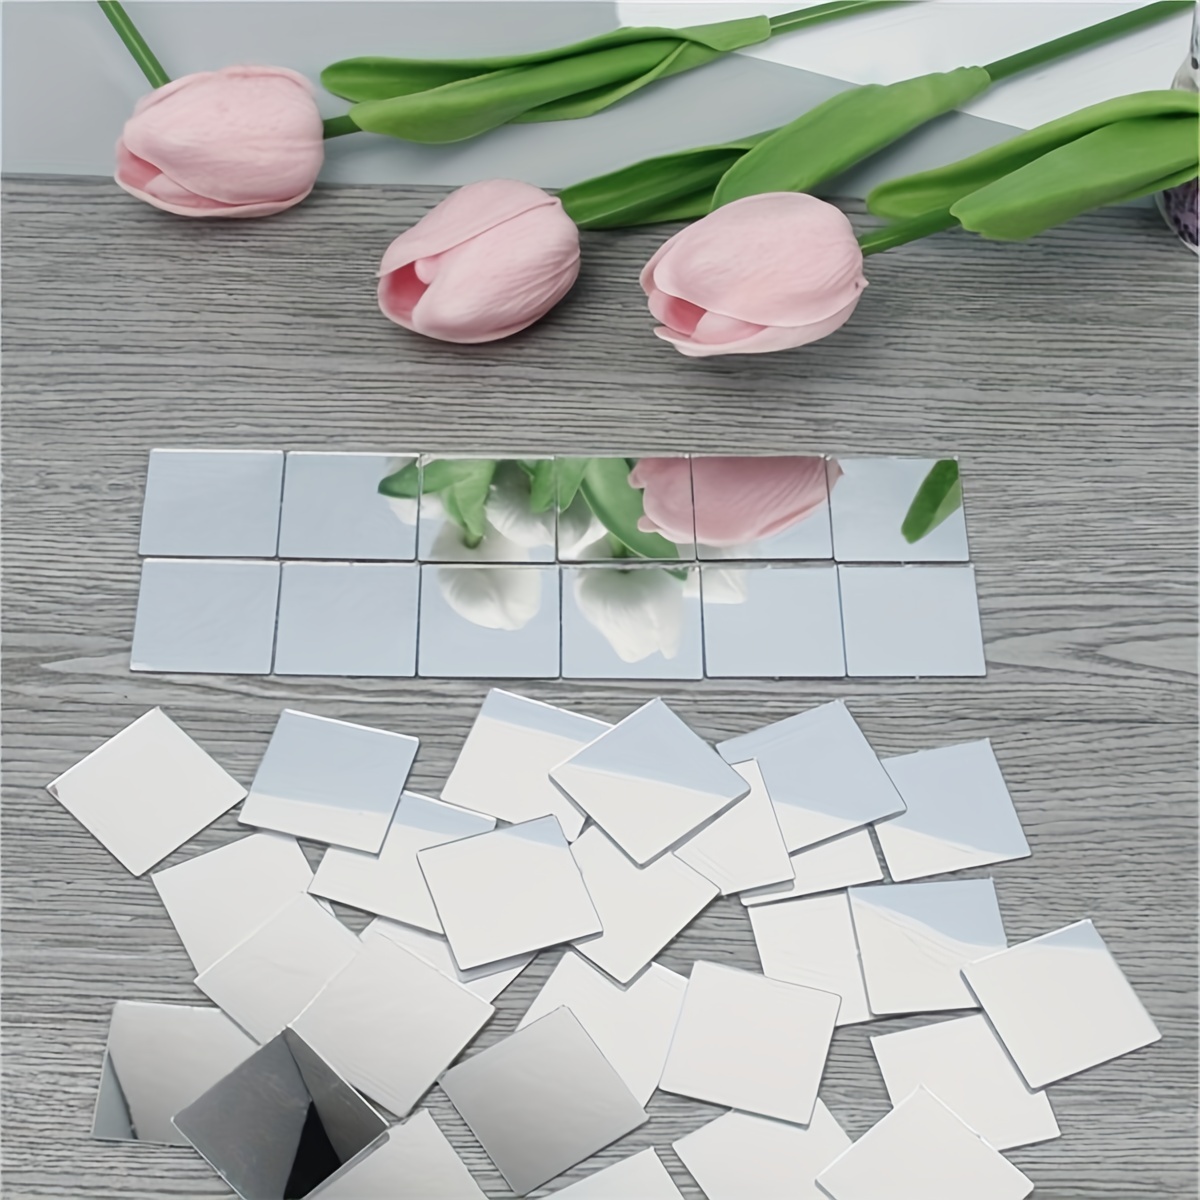 250PCS of 3/4'' Glass Mirror Roll Tiles for Crafts, 2CM Mini Square